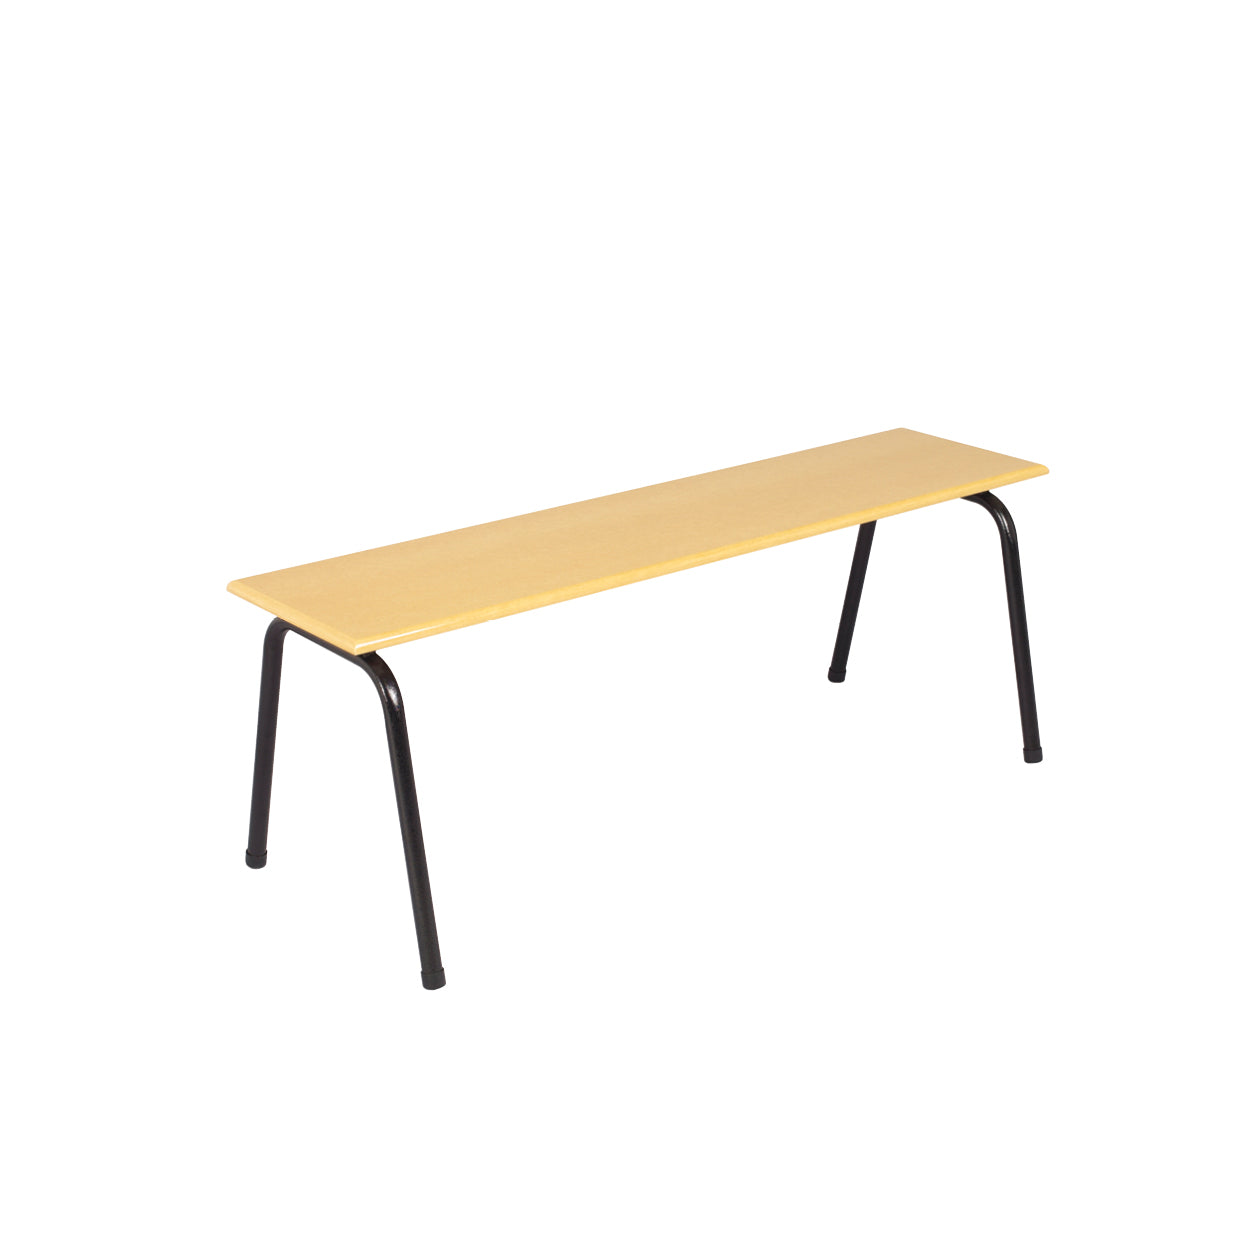 Hedcor bench